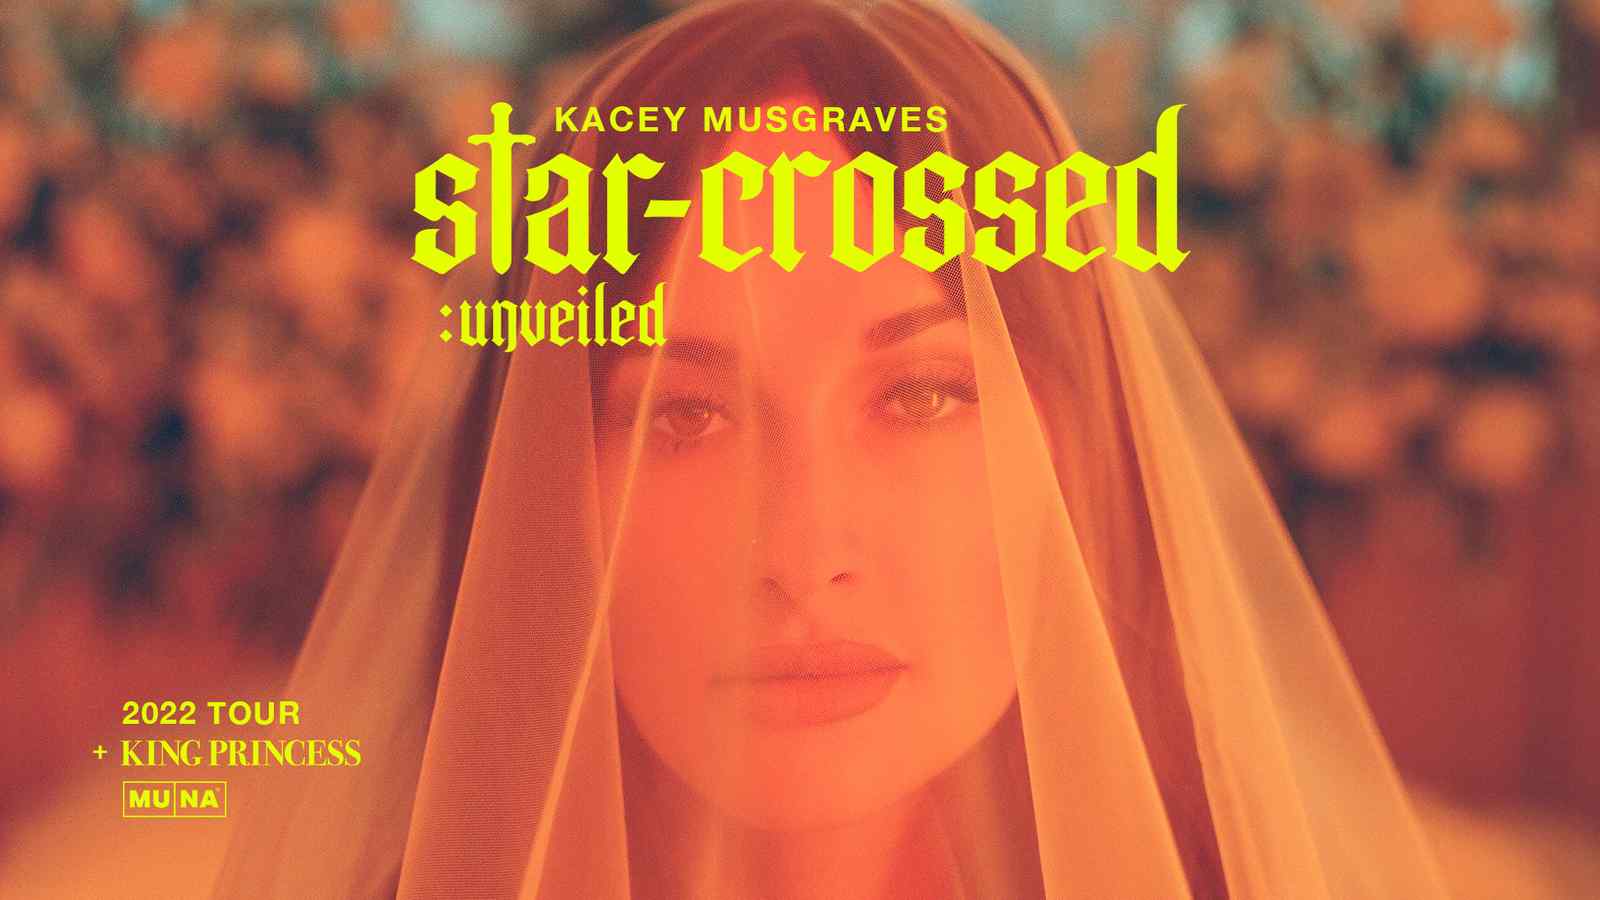 Kacey Musgraves | star-crossed: unveiled